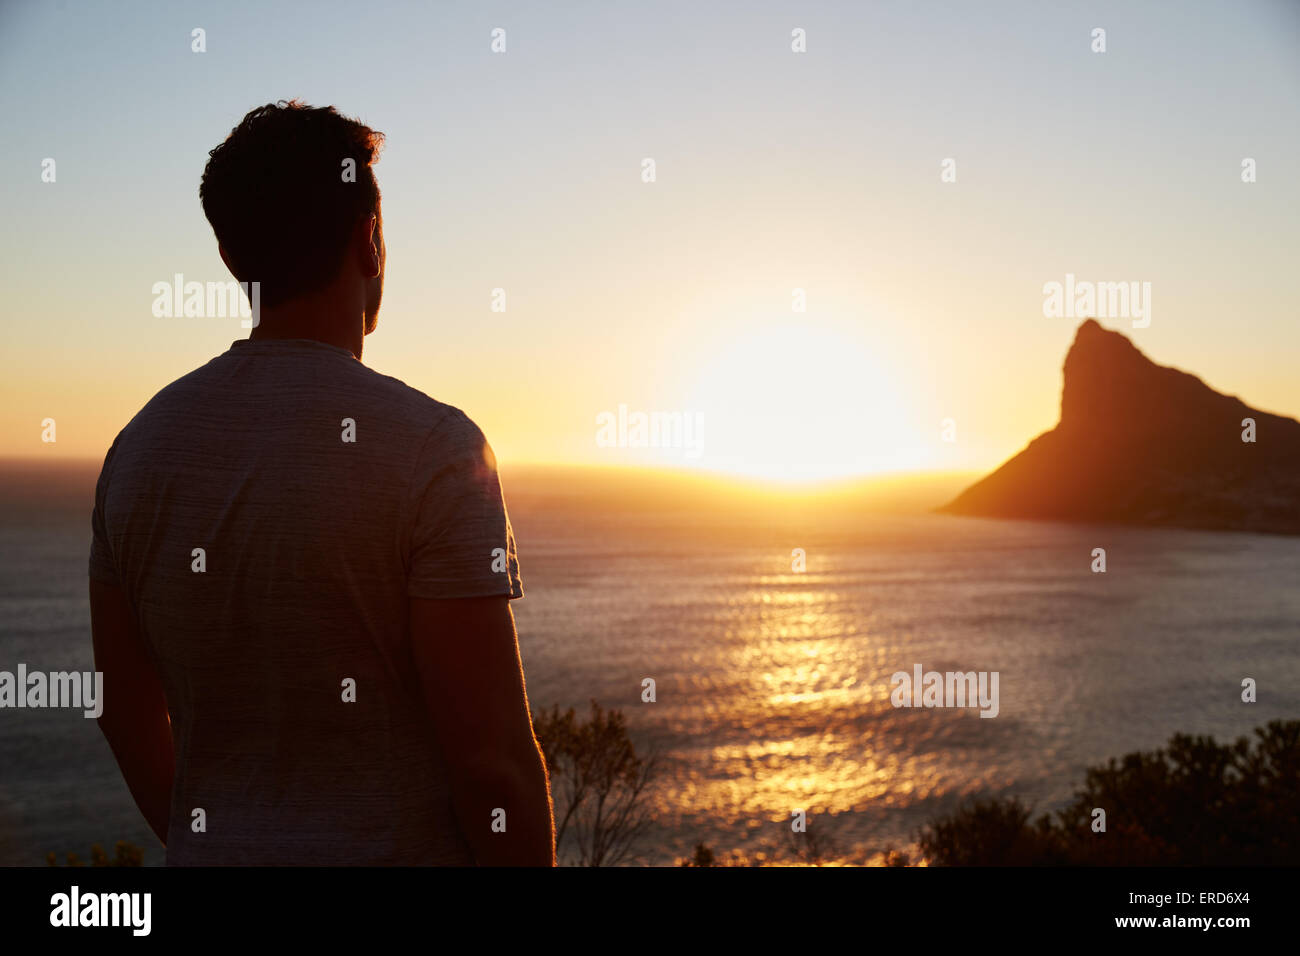 Silhouette Of Man Watching Sun Set Over Sea And Cliffs Stock Photo